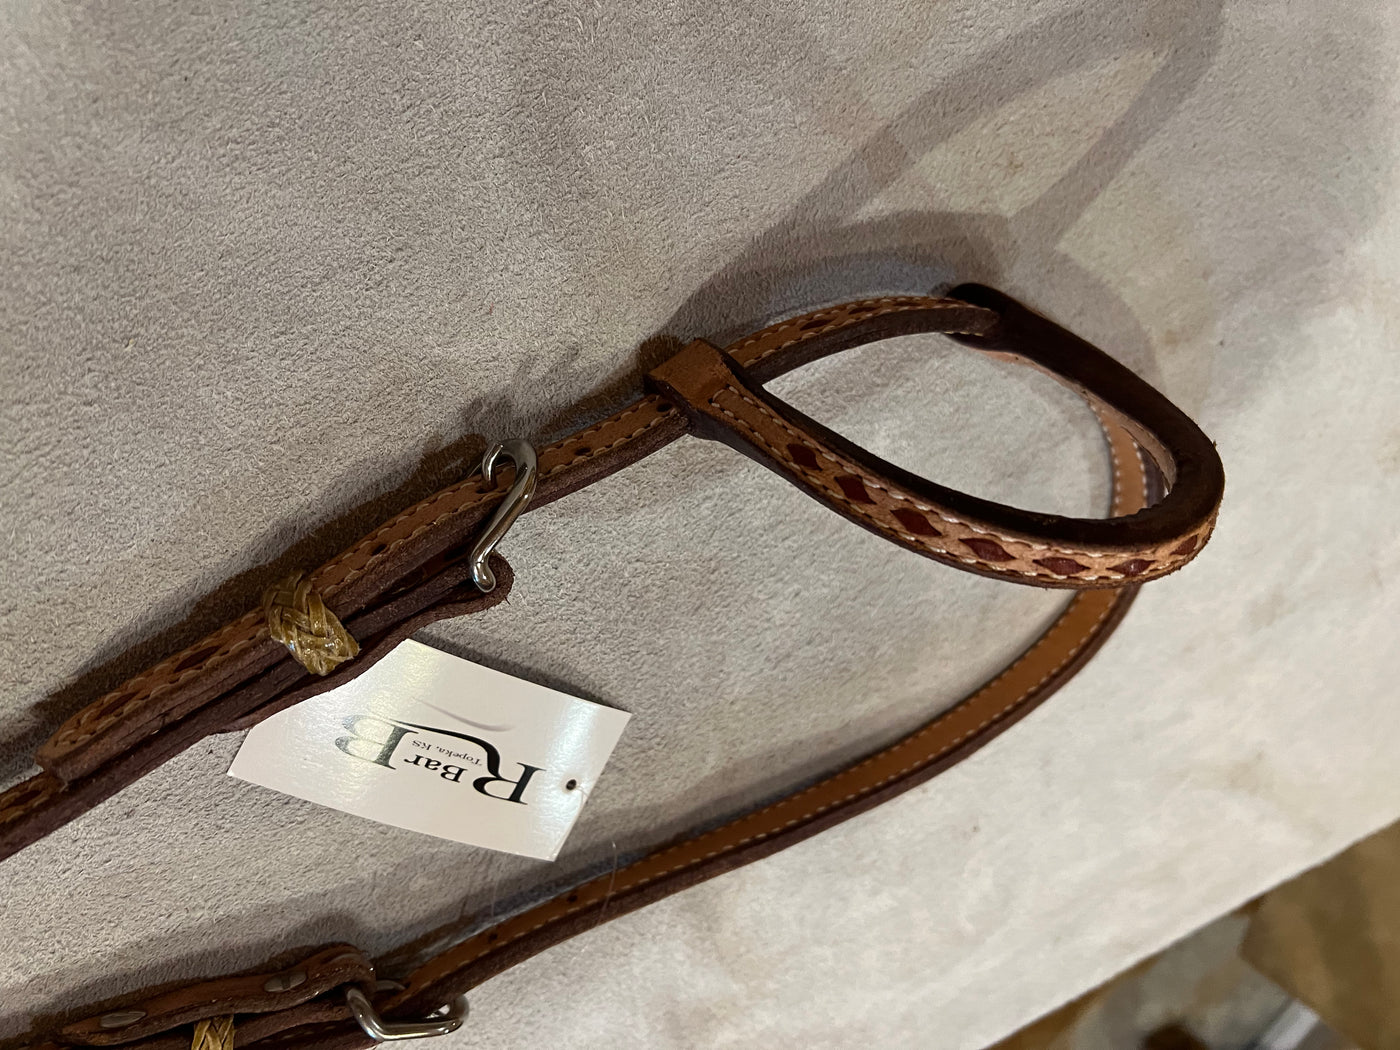 One Ear Headstall, HDST-136